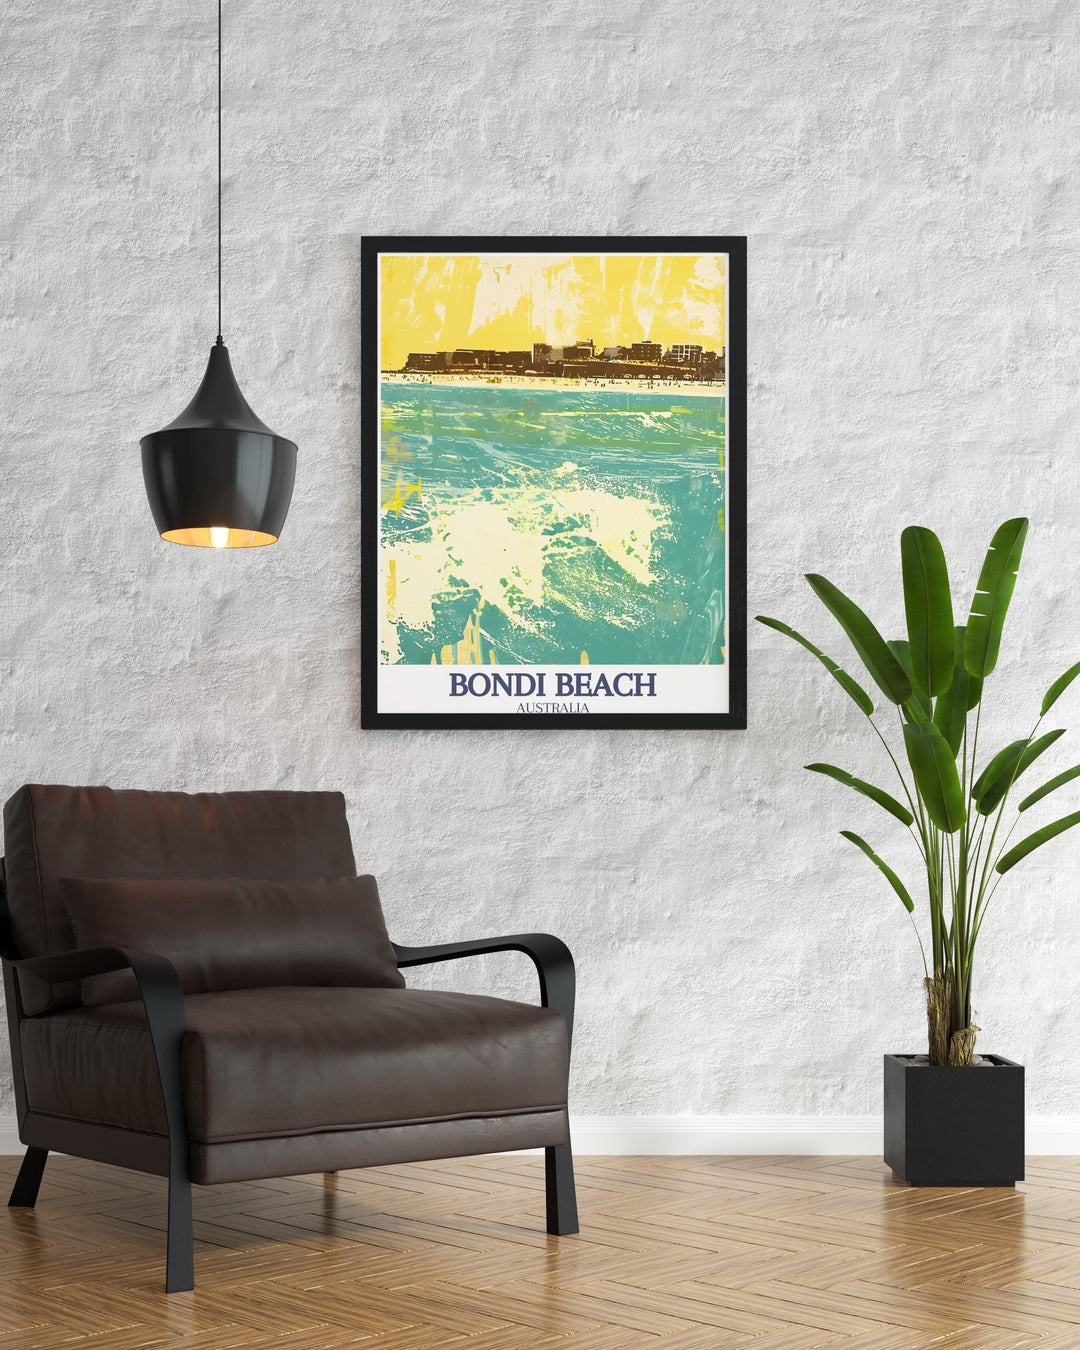 Detailed Sydney illustration featuring the iconic landmarks of the Sydney Opera House and Harbour Bridge. Bondi, South Bondi Beach stunning prints offer a vibrant depiction of the beach, perfect for adding a touch of elegance to your decor.